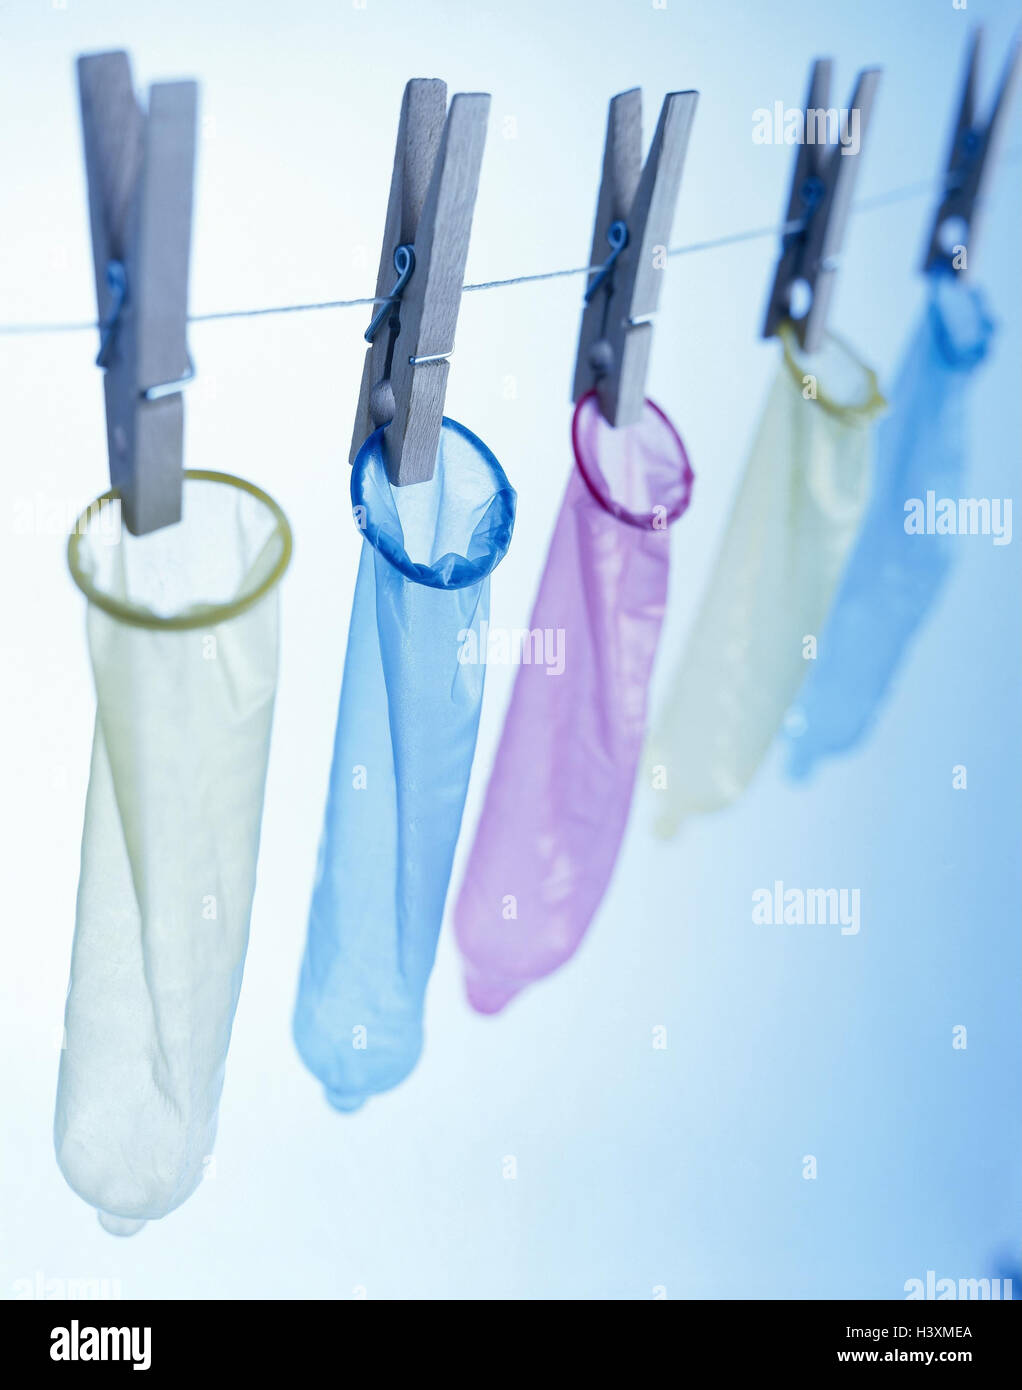 Clothesline, clamps, condoms, hang, Still life, product photography, studio, rope, cable, clothes pegs, prevention, security, contraception, condom, AIDS risk, danger infection, disease, protection, health, colours, differently, brightly, spectral filters Stock Photo